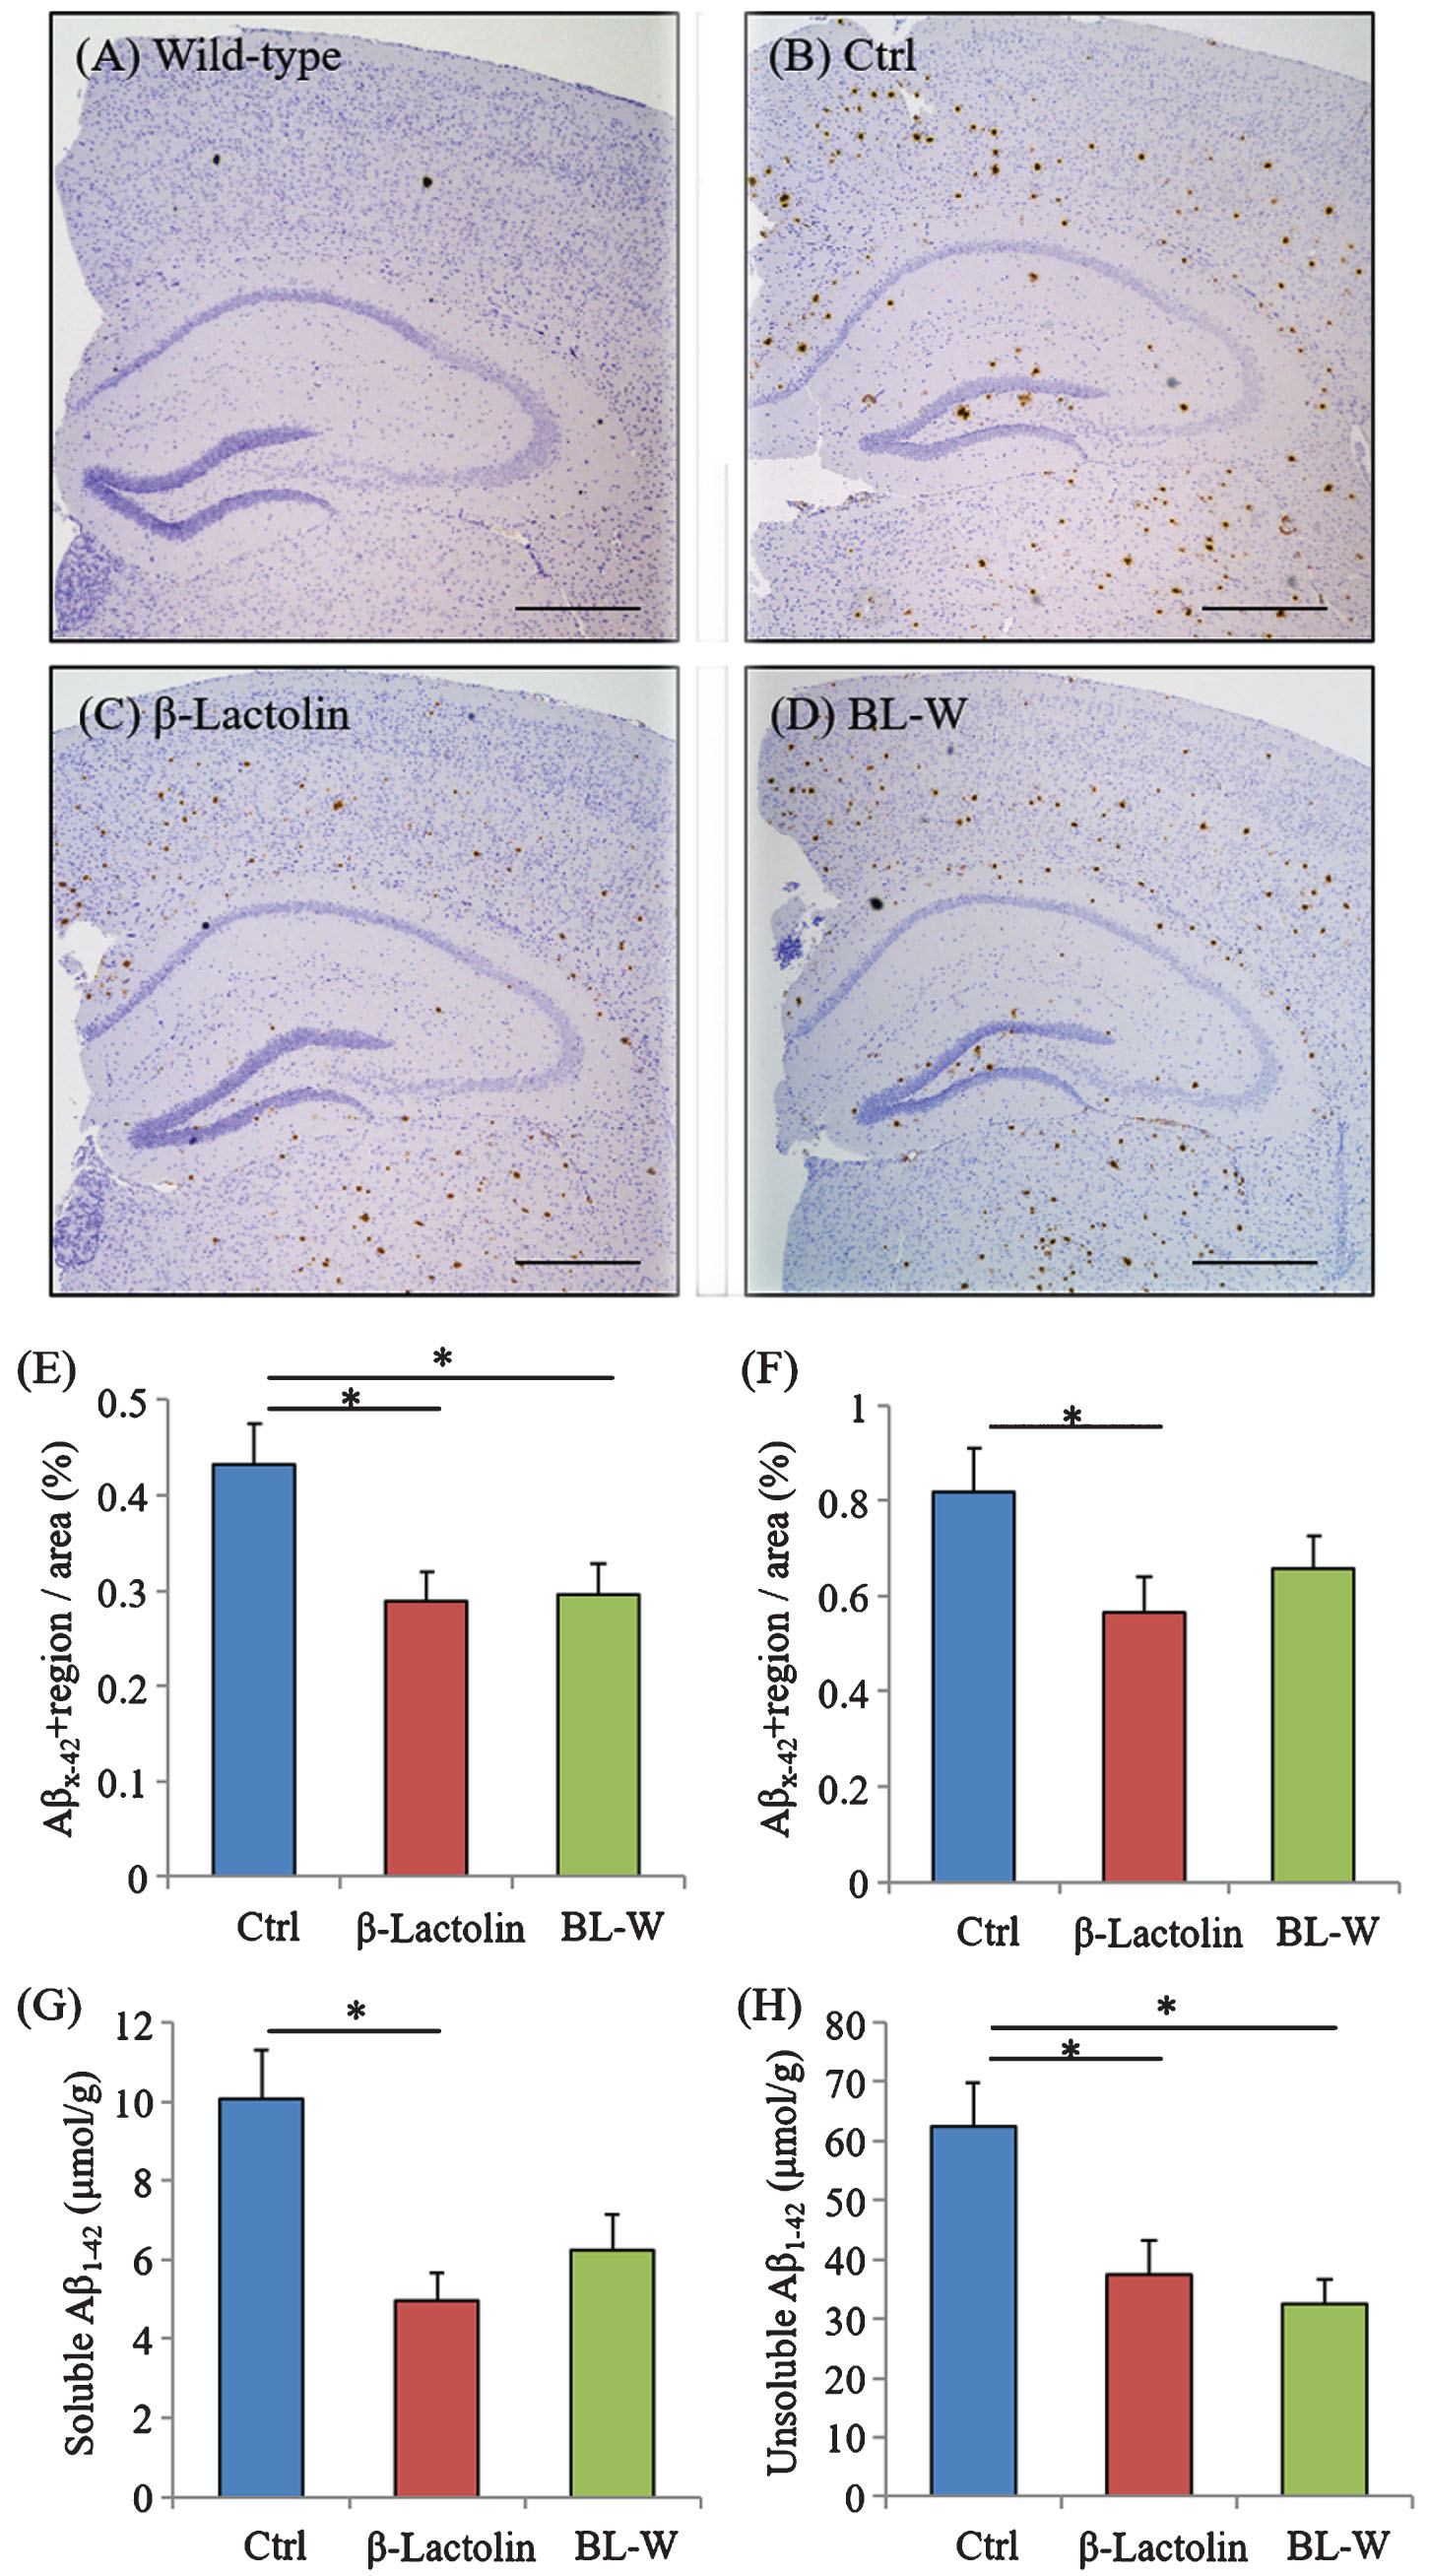 Effects of β-lactolin on Aβ deposition in 5×FAD mice. Transgenic 5×FAD and wild-type male mice aged 2.5 months were fed a diet with or without 0.05% w/w β-lactolin or 5% w/w β-lactolin-rich whey enzymatic digestion (BL-W) for 3.5 months. A-D) Representative immunohistochemistry images for Aβ1-42 in wild-type mice and transgenic mice with or without β-lactolin or β-lactolin-rich whey enzymatic digestion. Scale bars, 400μm. E, F) Percentage of the Aβ1-42-positive area detected by immunohistochemistry in the cortex and hippocampus in transgenic control mice (Ctrl) and transgenic mice fed a diet containing β-lactolin or BL-W. G, H) The levels of TBS-soluble or TBS-insoluble/TBS-T soluble Aβ1-42 in the frontal cortex. Data are presented as means±SEM (sample size: wild-type mice, 10; control transgenic mice, 10; transgenic mice fed with β-lactolin, 11; or transgenic mice fed with BL-W, 10). p-values shown in the graph were calculated by one-way ANOVA followed by the Tukey–Kramer test. *p < 0.05.